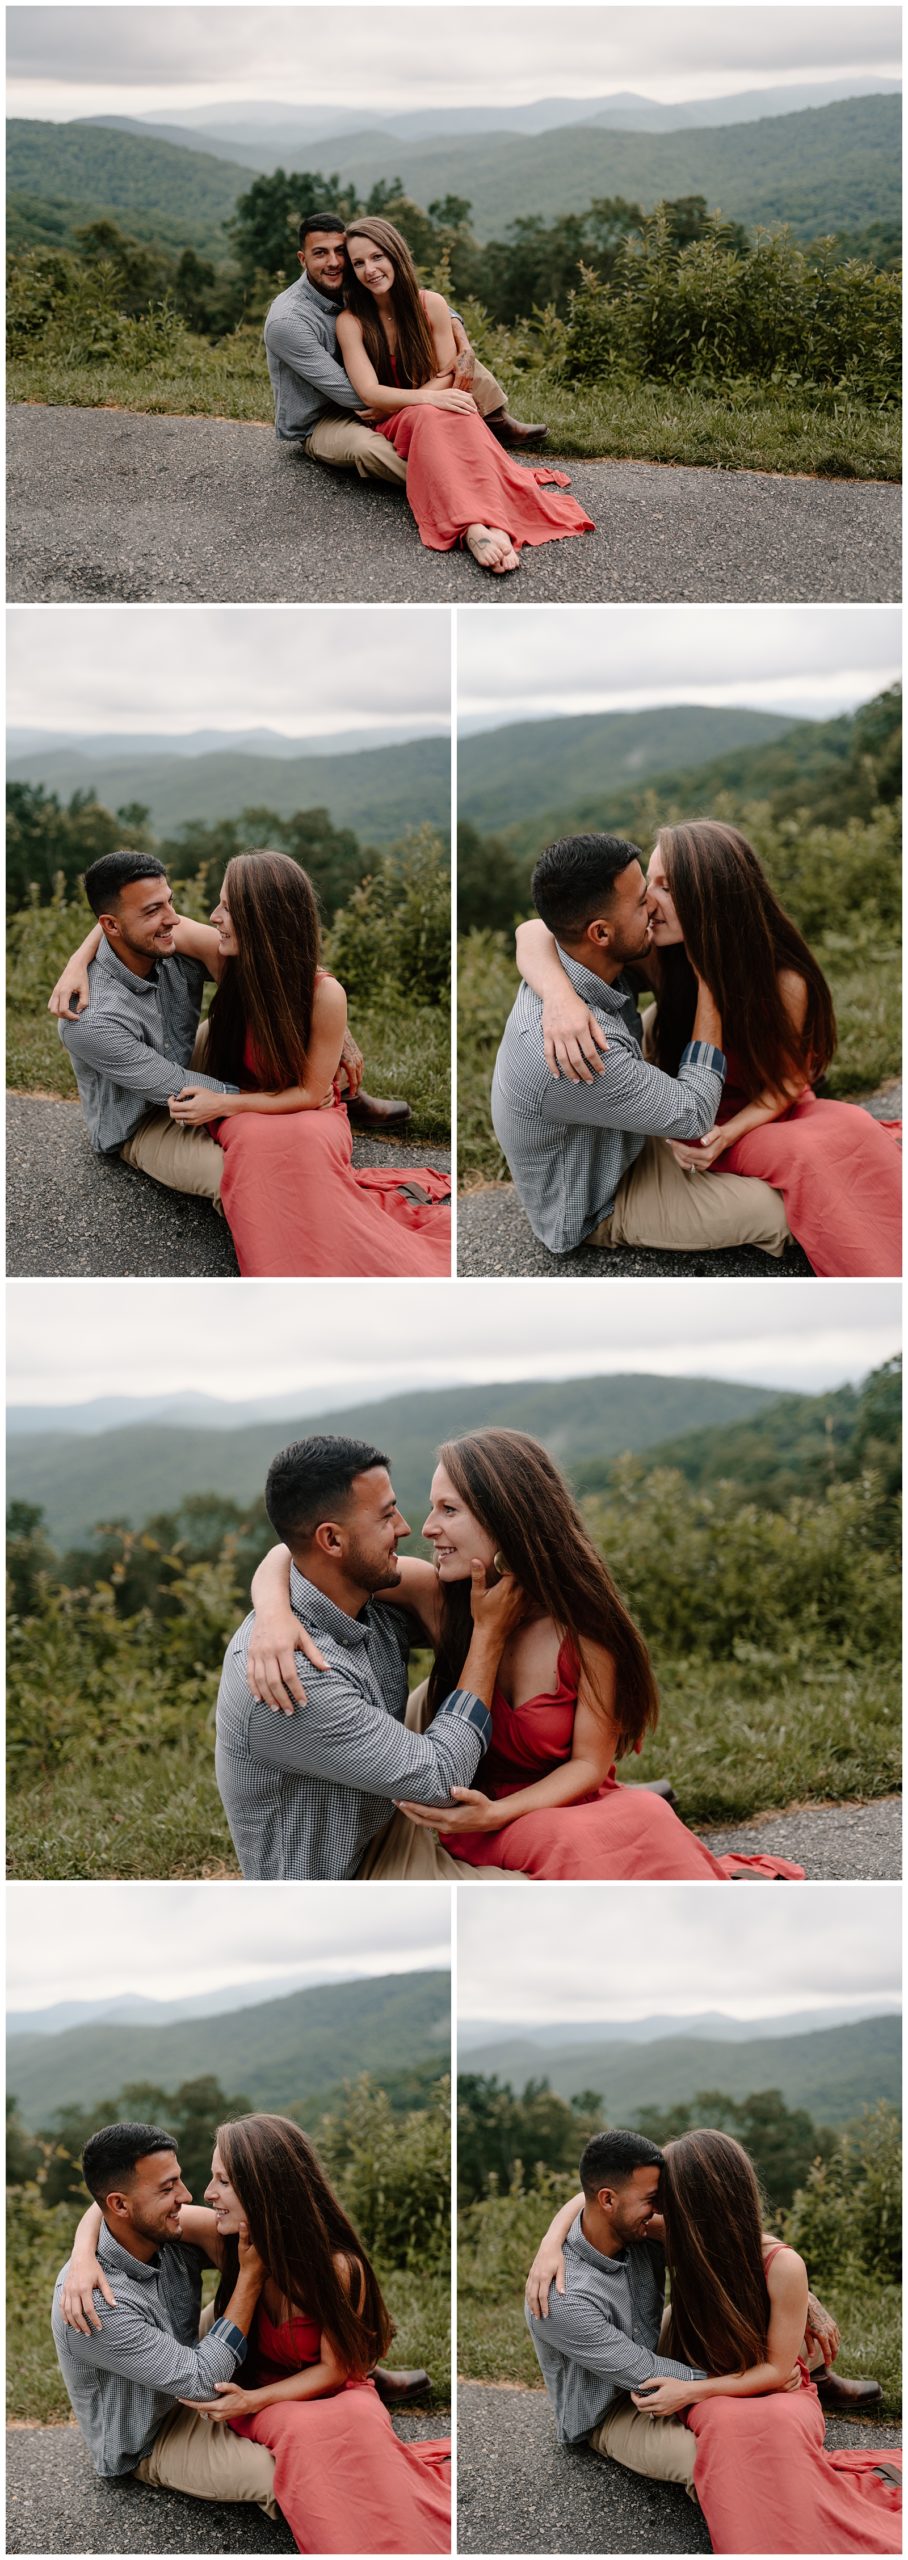 Blue Ridge Parkway engagement session in North Carolina, near Asheville and Boone